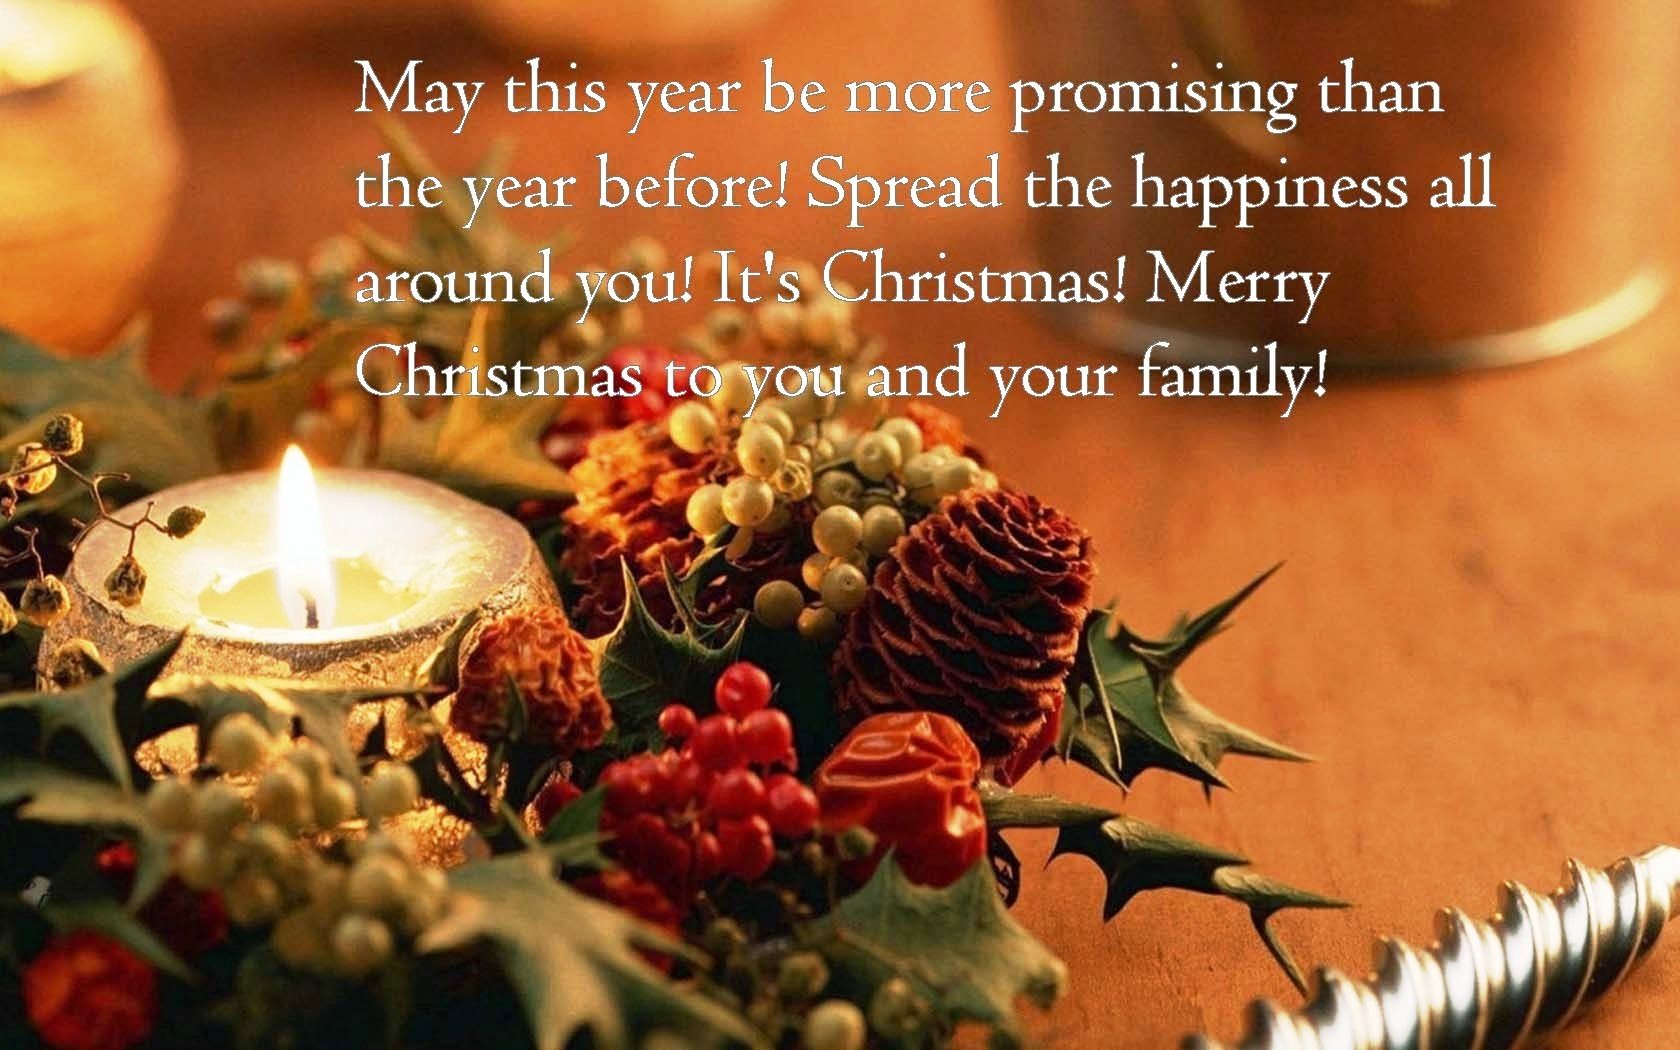 Inspirational Christmas Quotes For Cards
 The 45 Best Inspirational Merry Christmas Quotes All